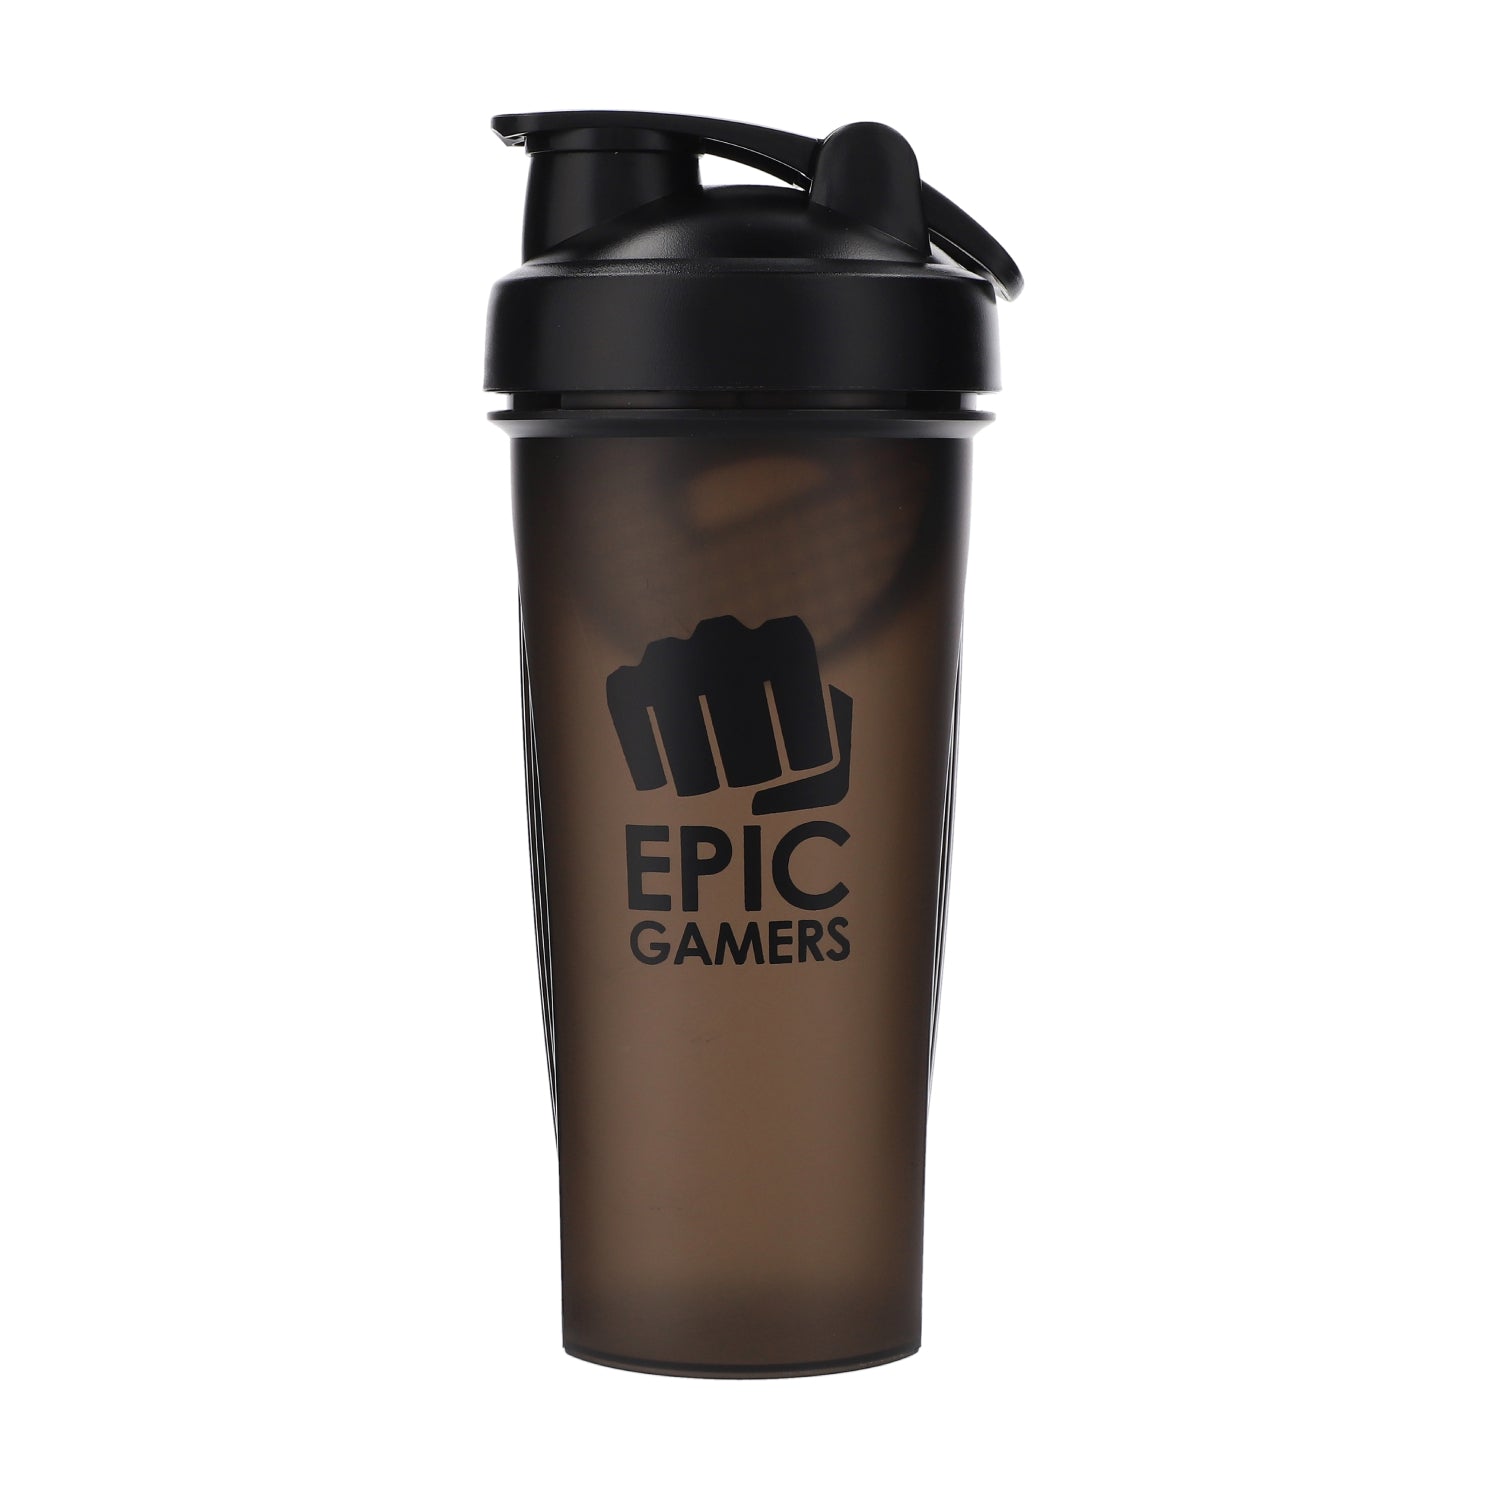 Epic Gamers Energy Shaker 20oz - Black Out - Store 974 | ستور ٩٧٤